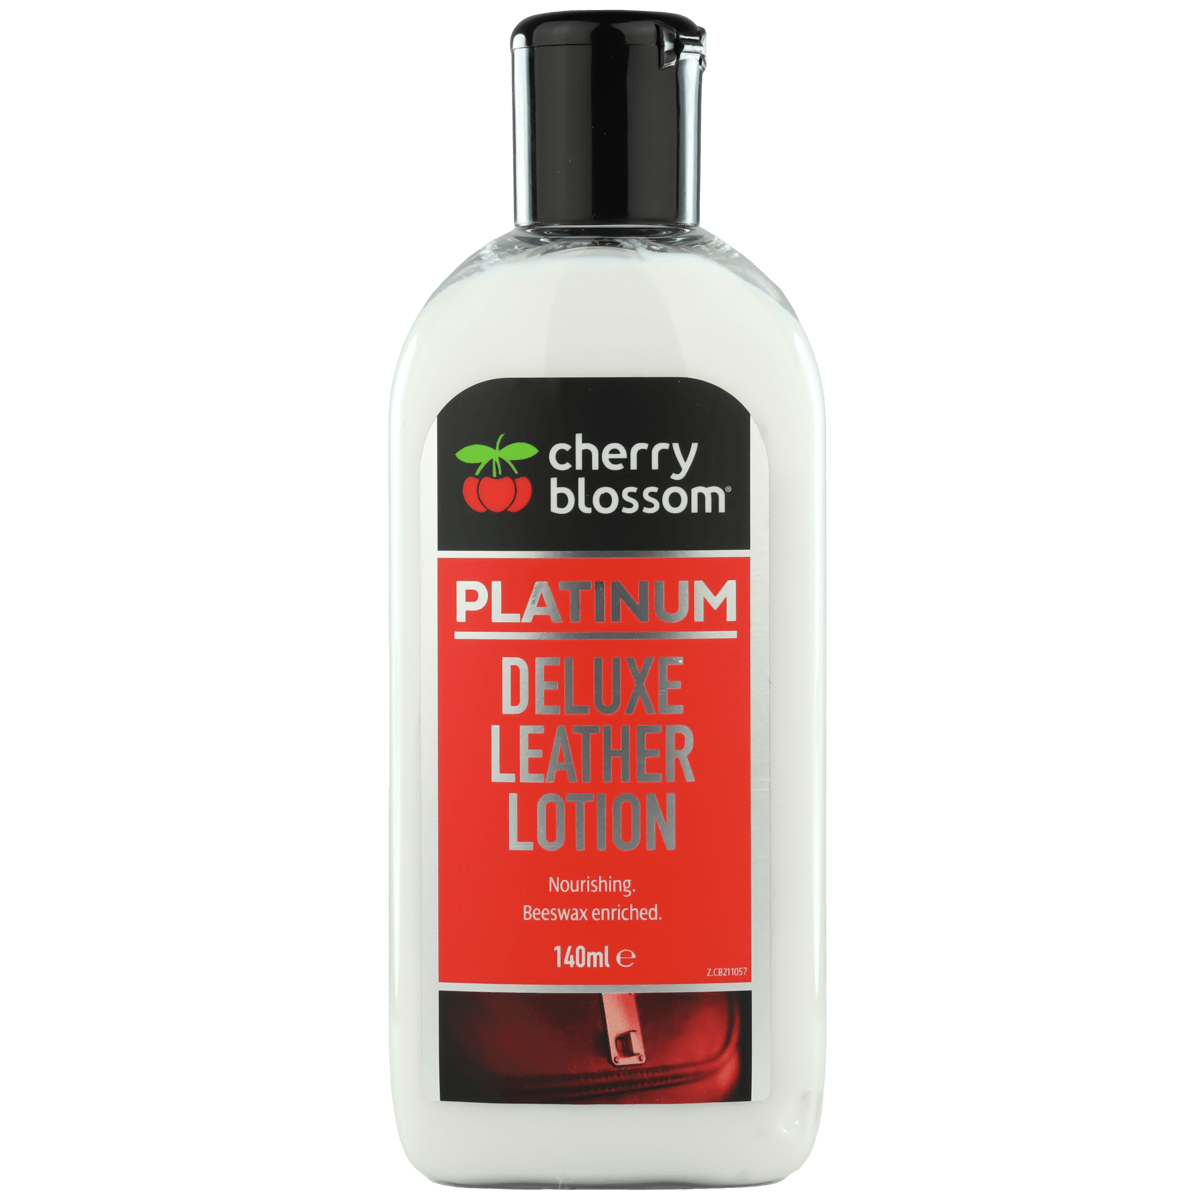 Deluxe Leather Lotion